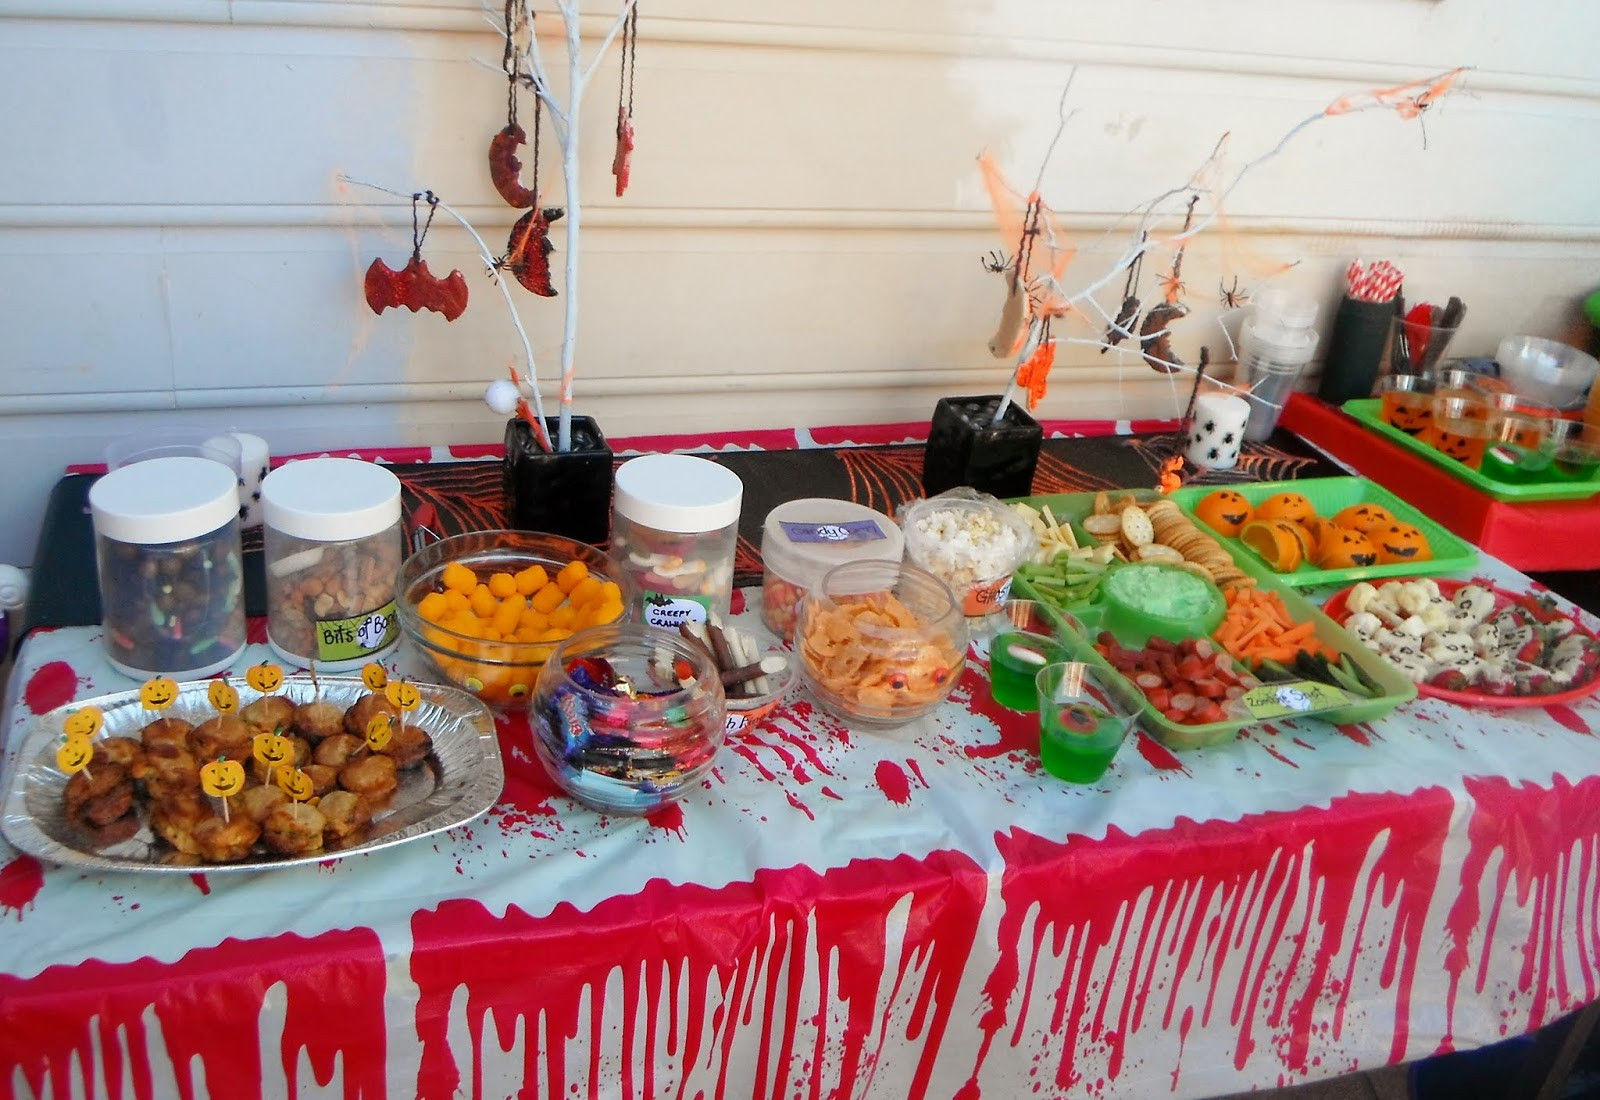 Halloween Ideas For Kids Party
 Adventures at home with Mum Halloween Party Food